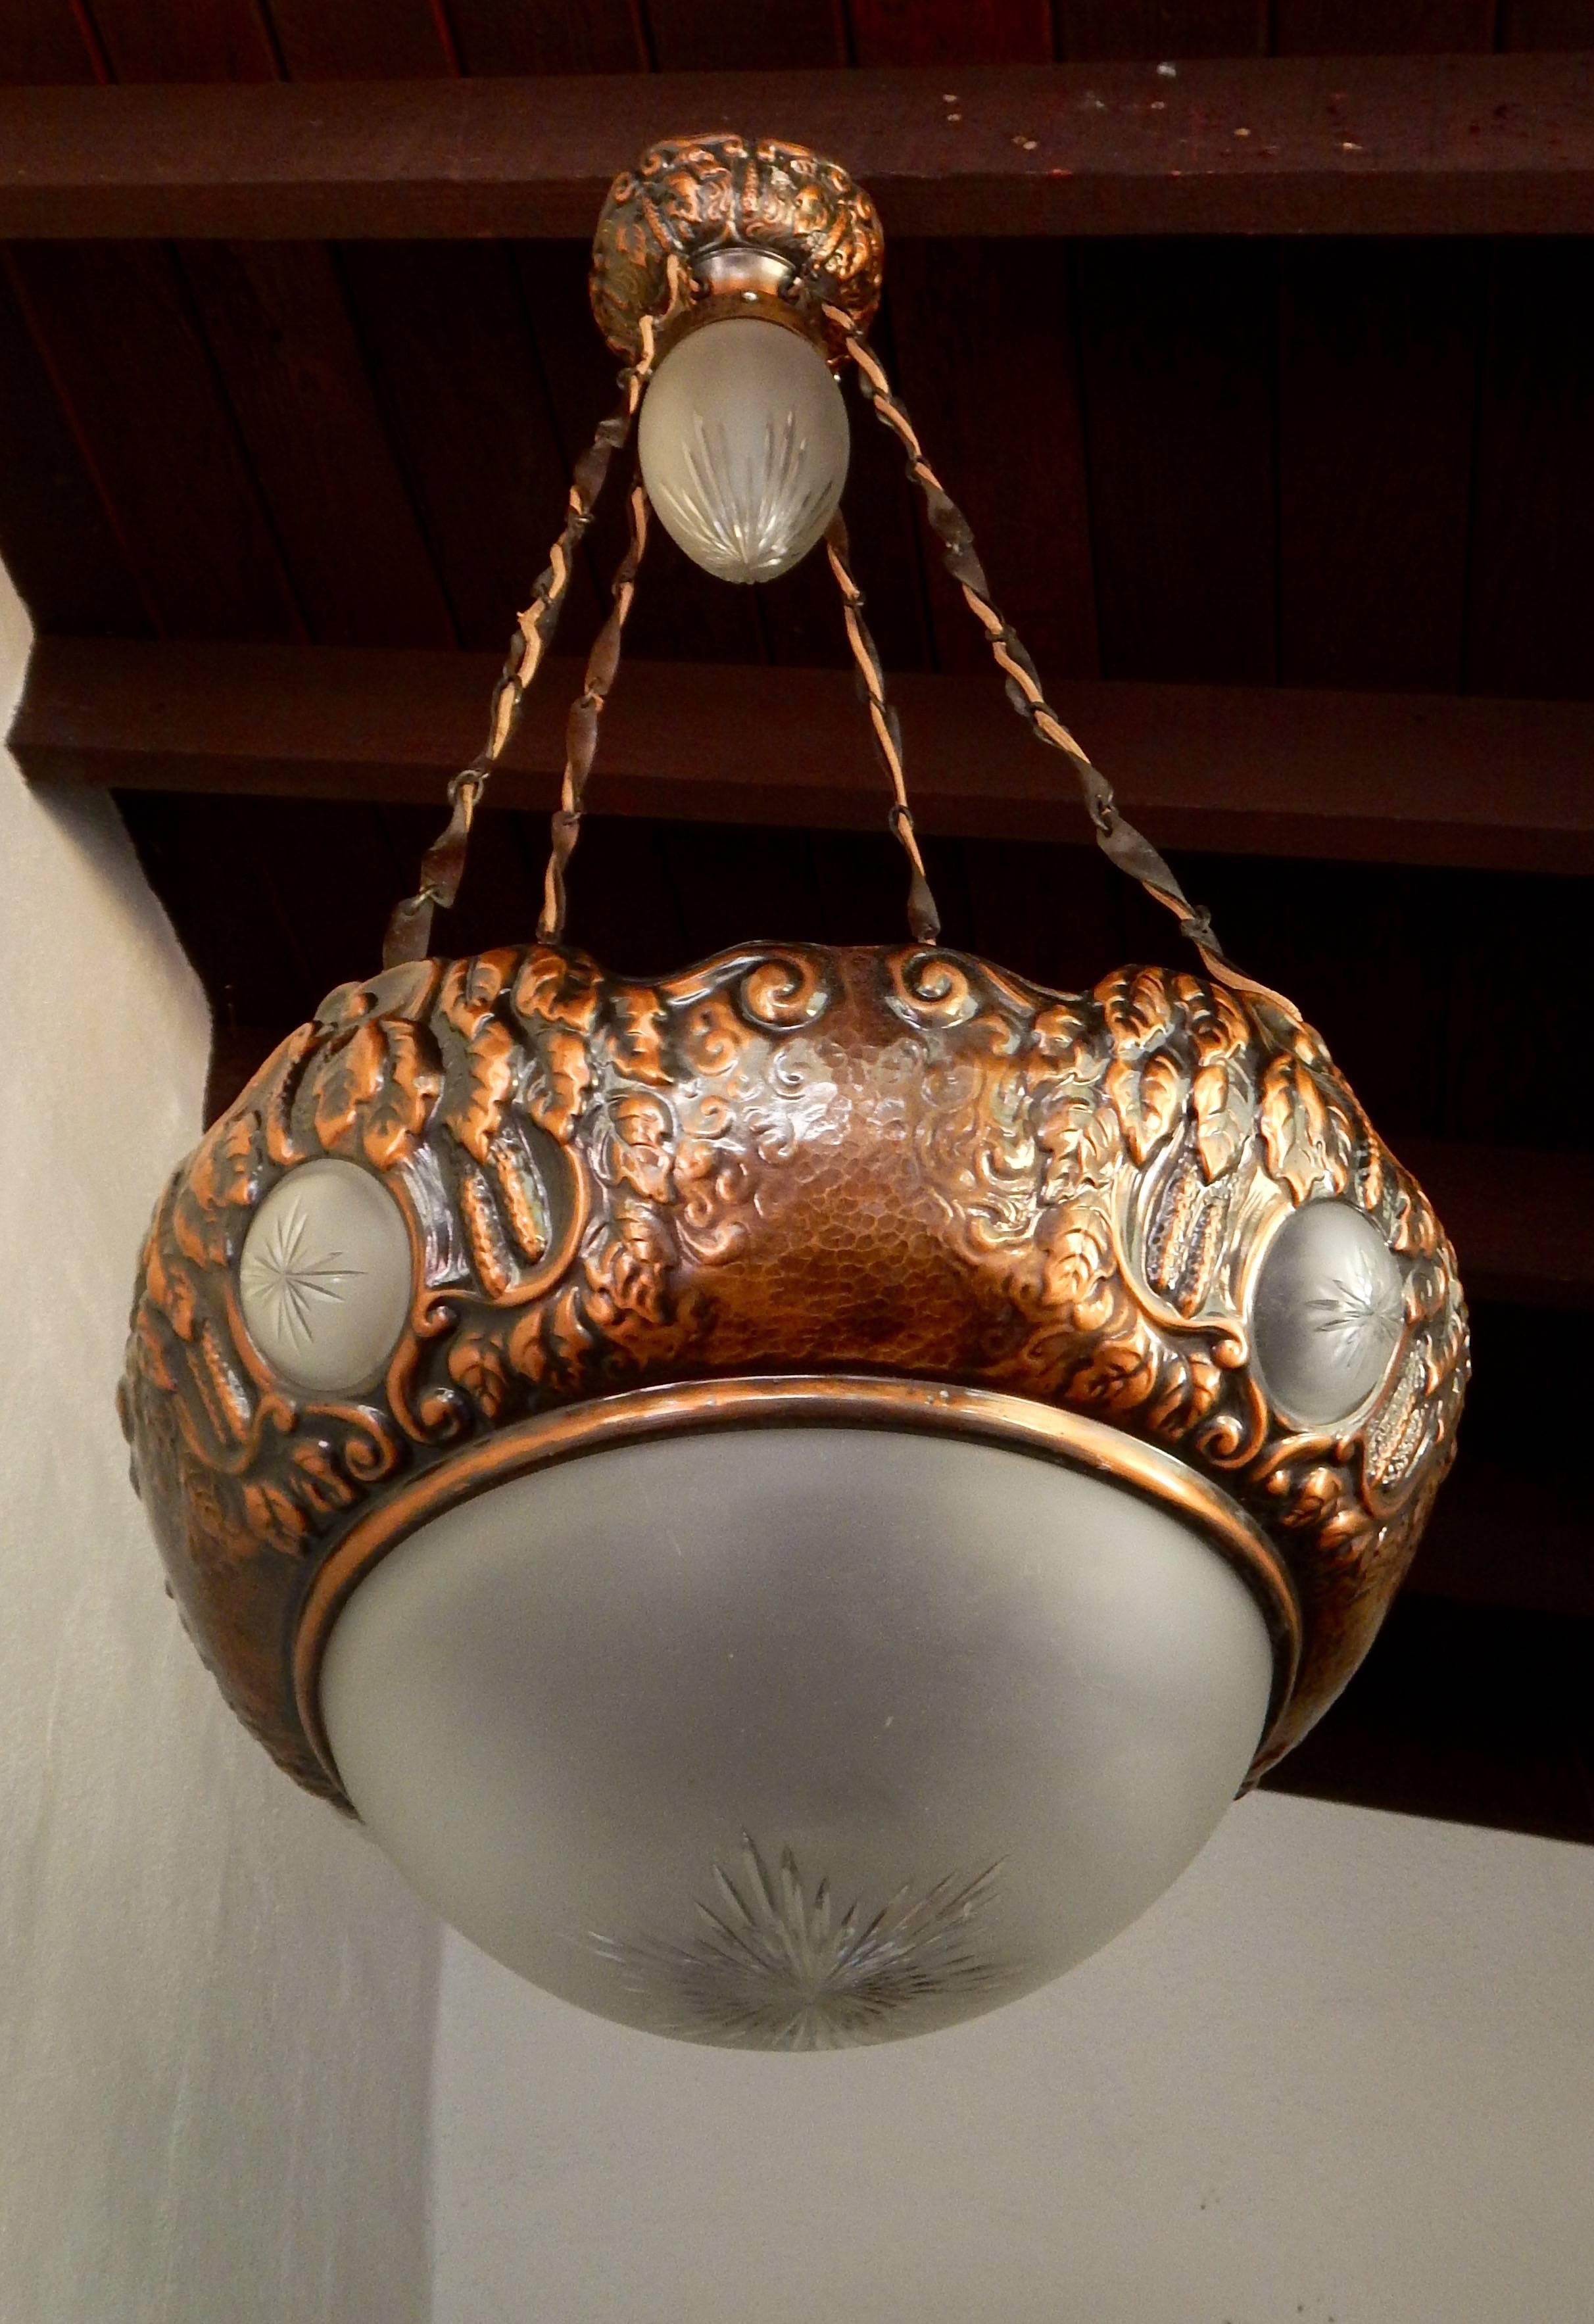 Swedish Victorian hand-hammered copper and glass hanging fixture with floral motifs, circa 1900. All glass is original to fixture and is in excellent condition with some minor scratches. The fixture can be shortened significantly. Price includes